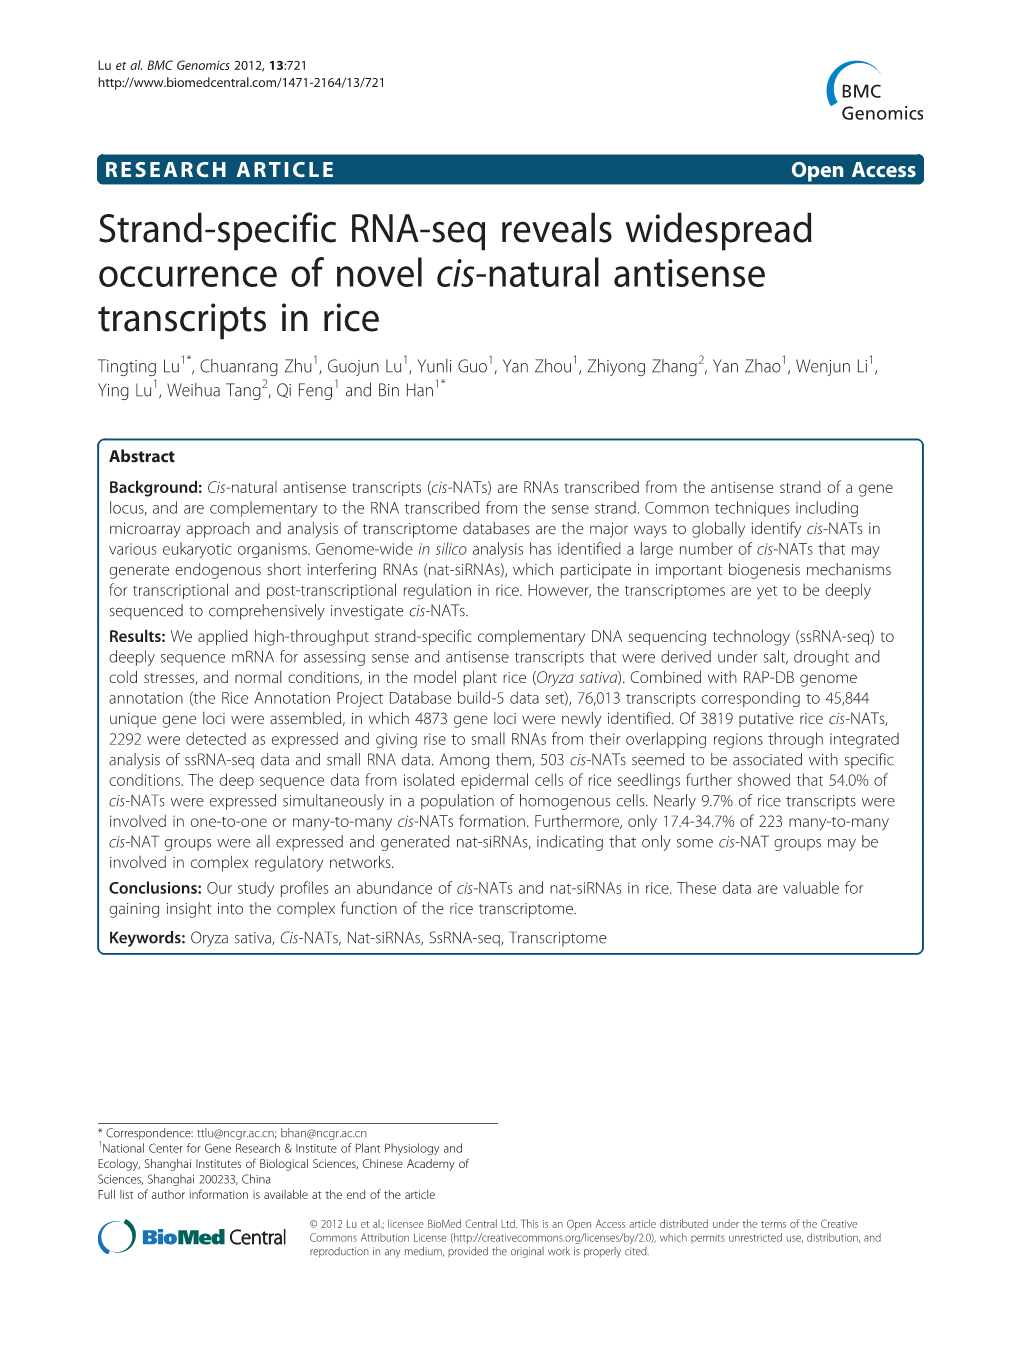 Strand-Specific RNA-Seq Reveals Widespread Occurrence of Novel Cis